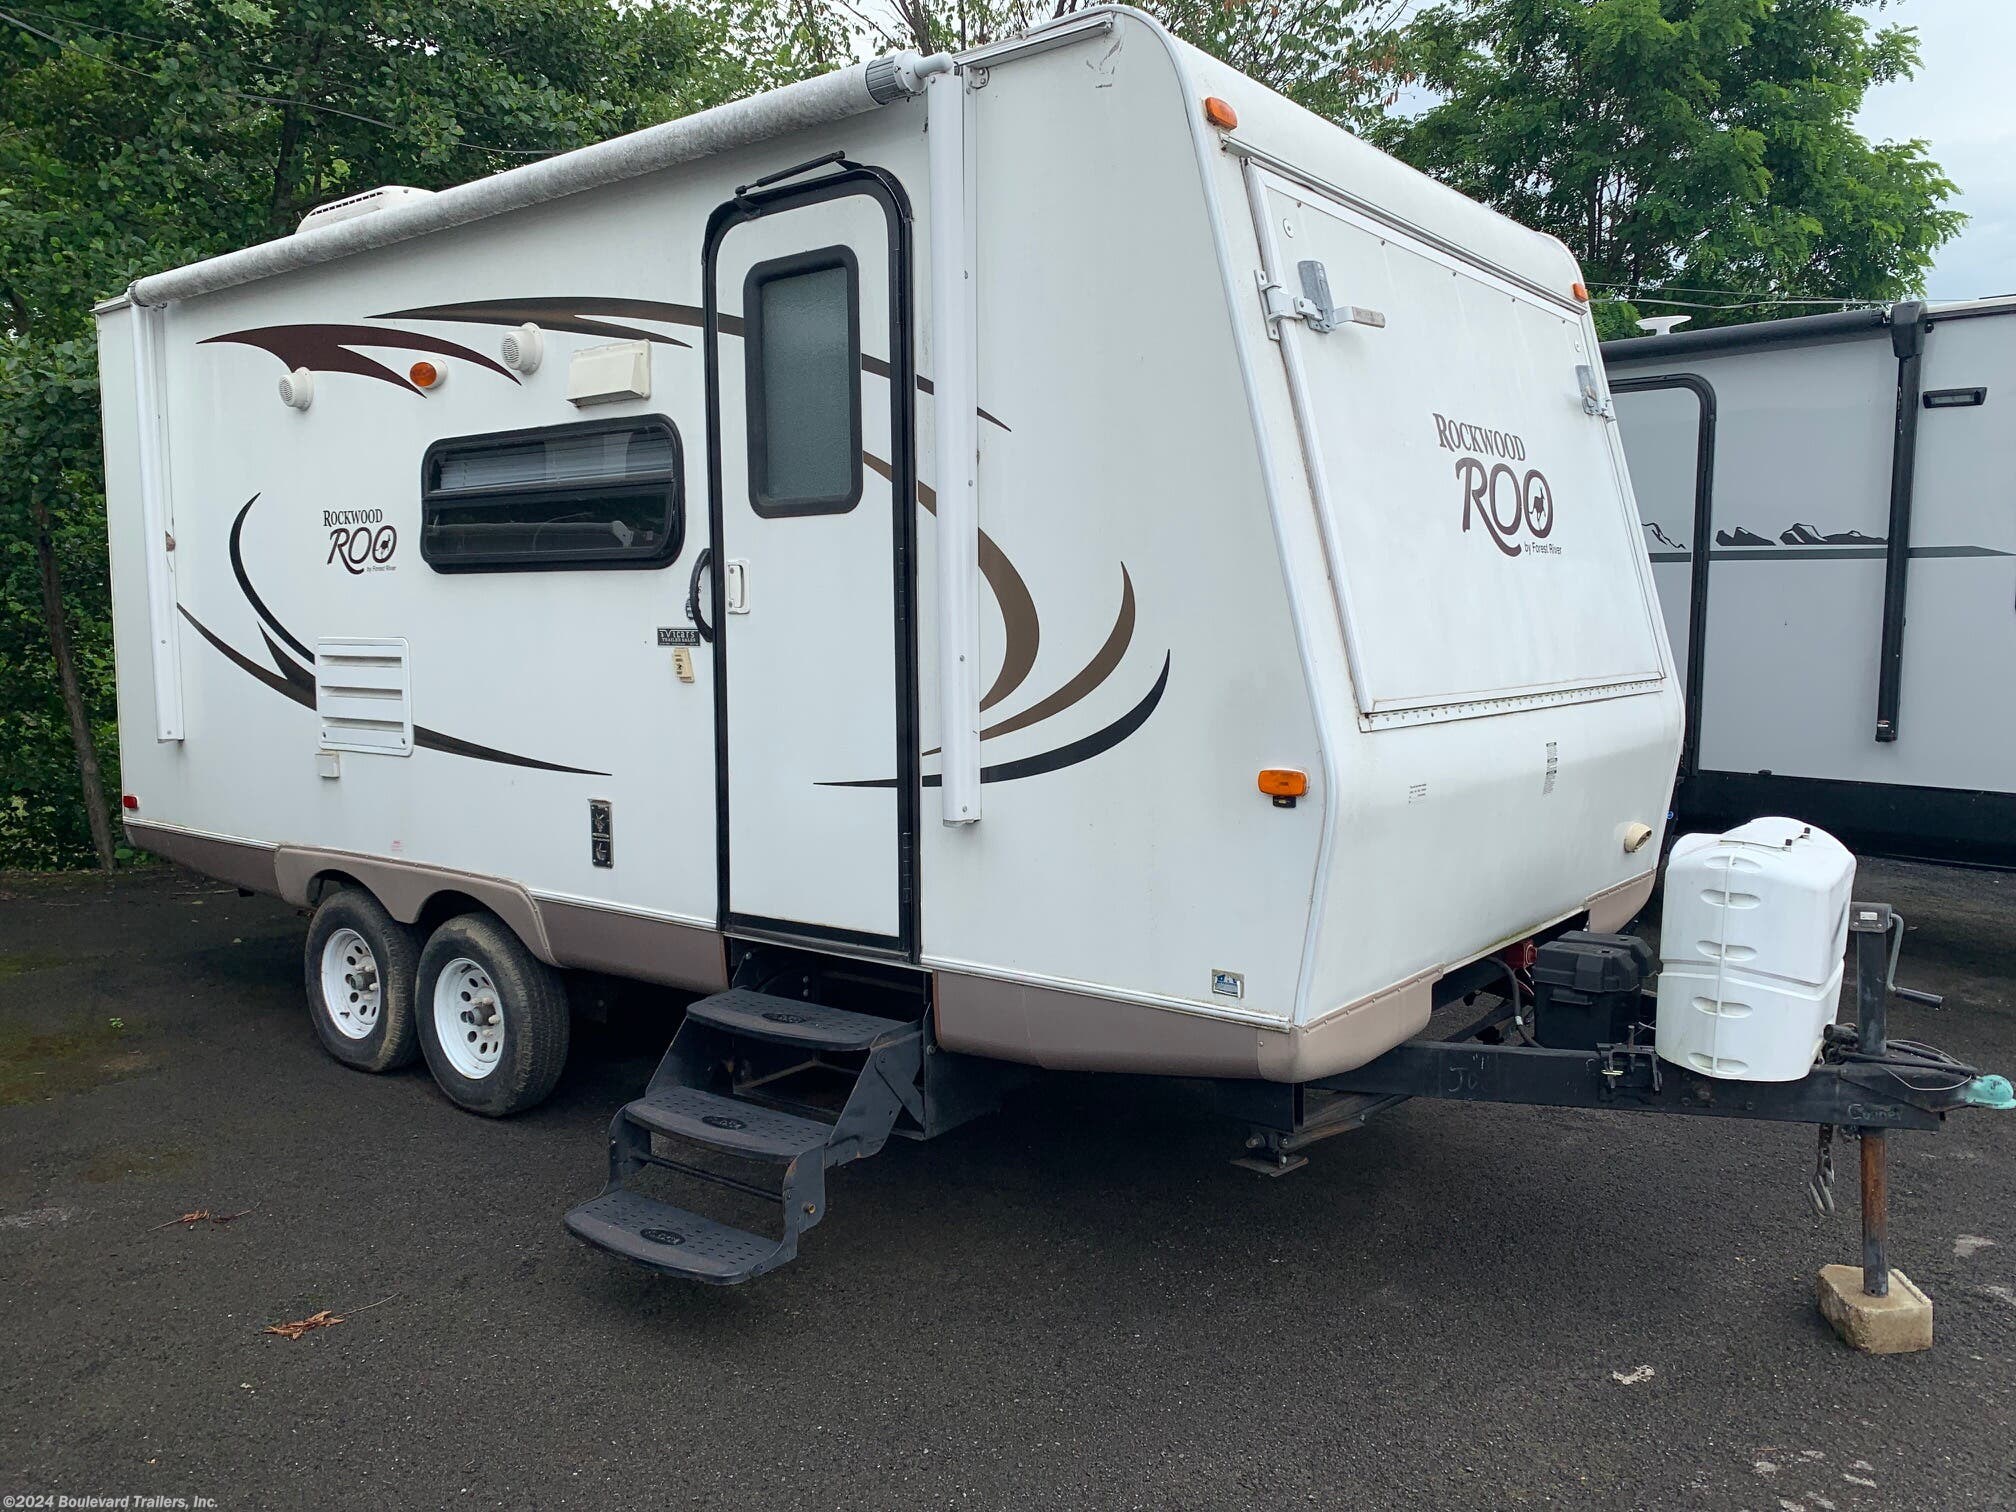 2011 Forest River Rockwood Roo 21SS RV for Sale in Whitesboro, NY 13492 2011 Forest River Rockwood Roo 21ss